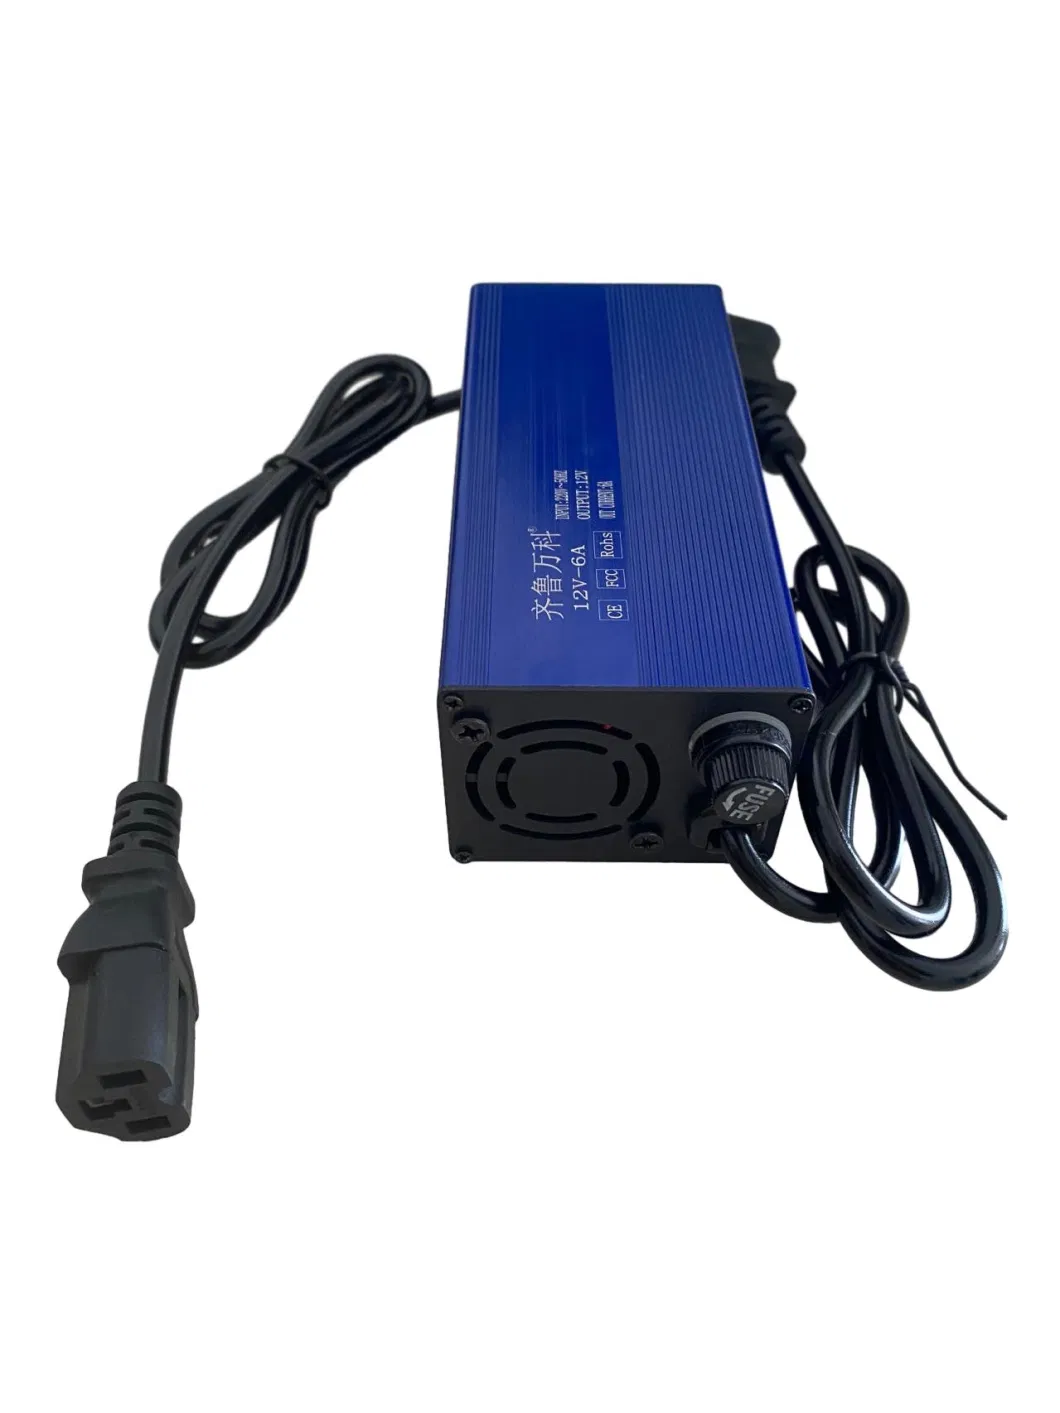 Low Price Battery Charger for Electric Carts Golf Carts Forklifts Motor Cycle